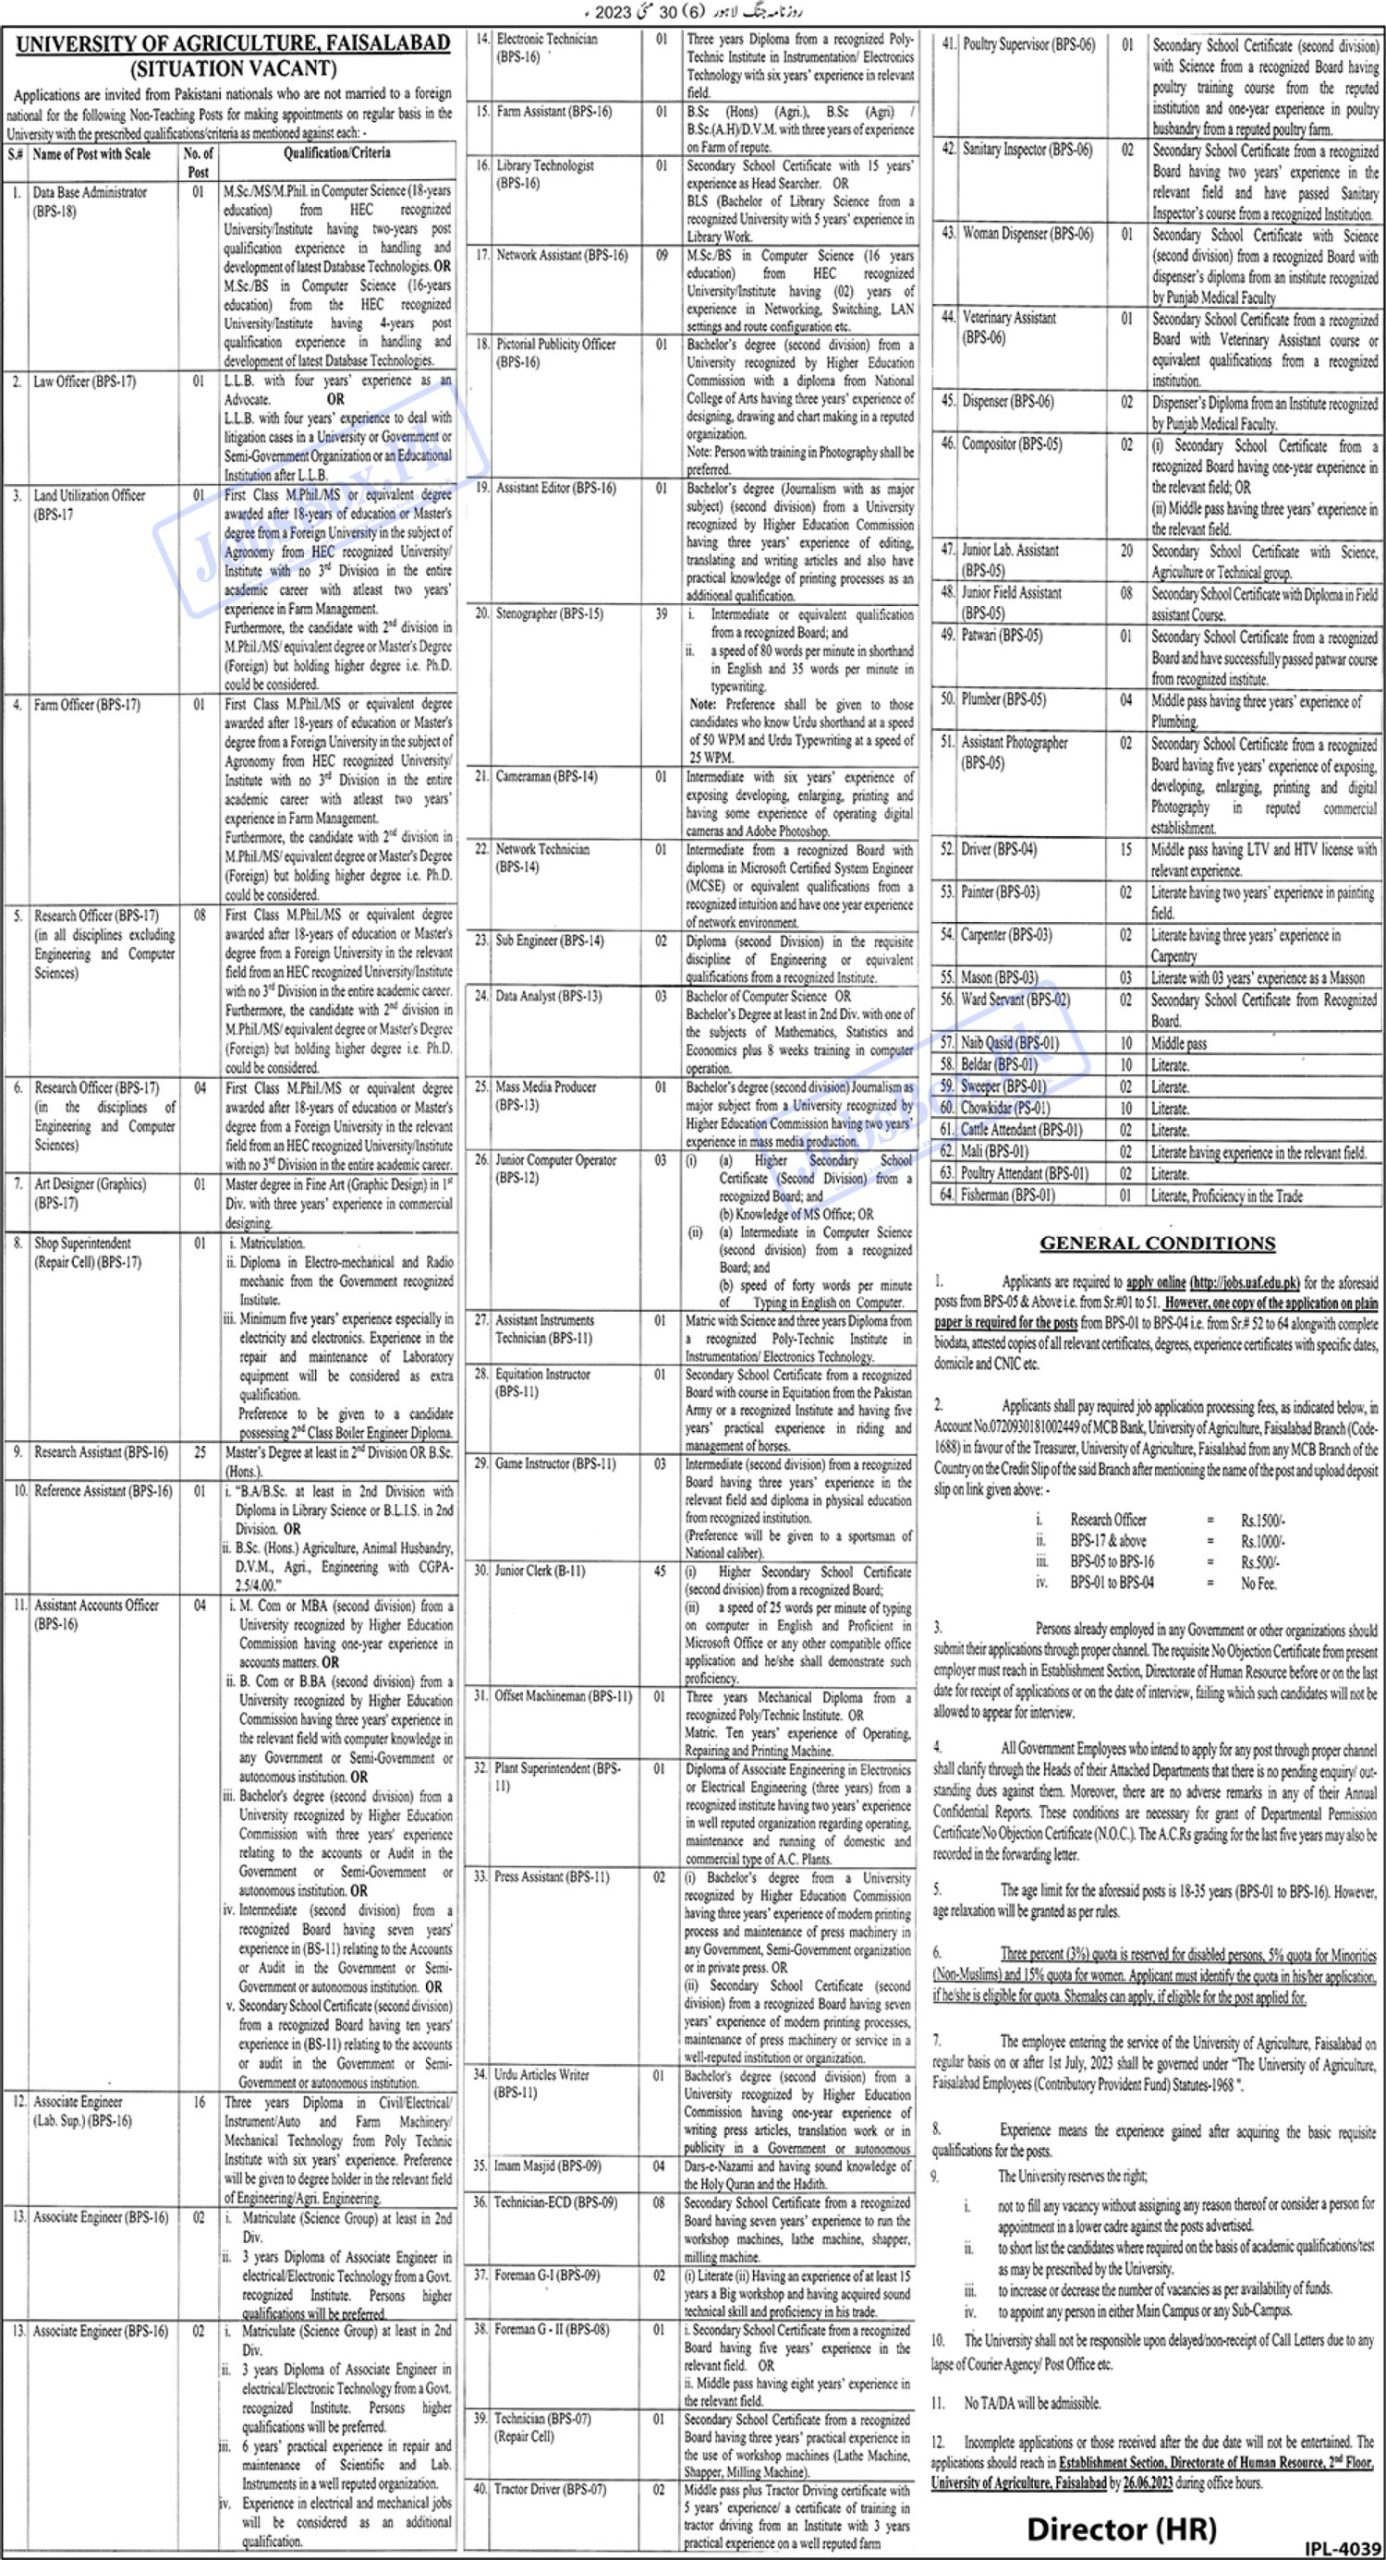 University of Agriculture Faisalabad Jobs 2023 Online Apply Form & Eligibility Criteria